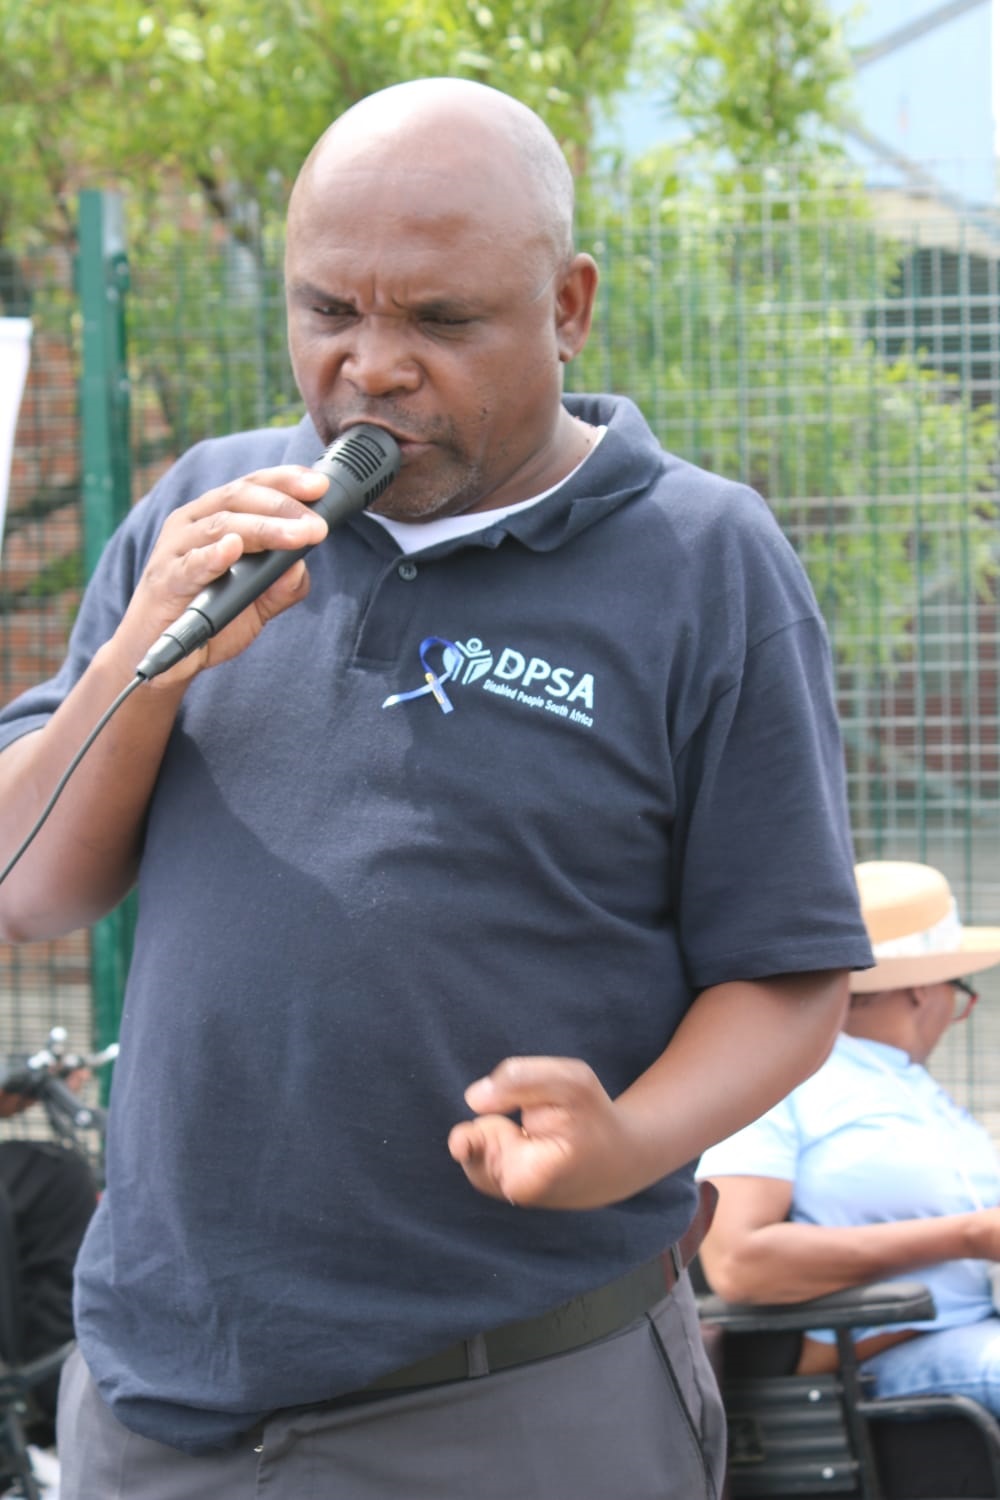 Disabled People South Africa chairman, Bongani Yamba, said the abuse faced by people living with disabilities is serious. Photo by Lulekwa Mbadamane